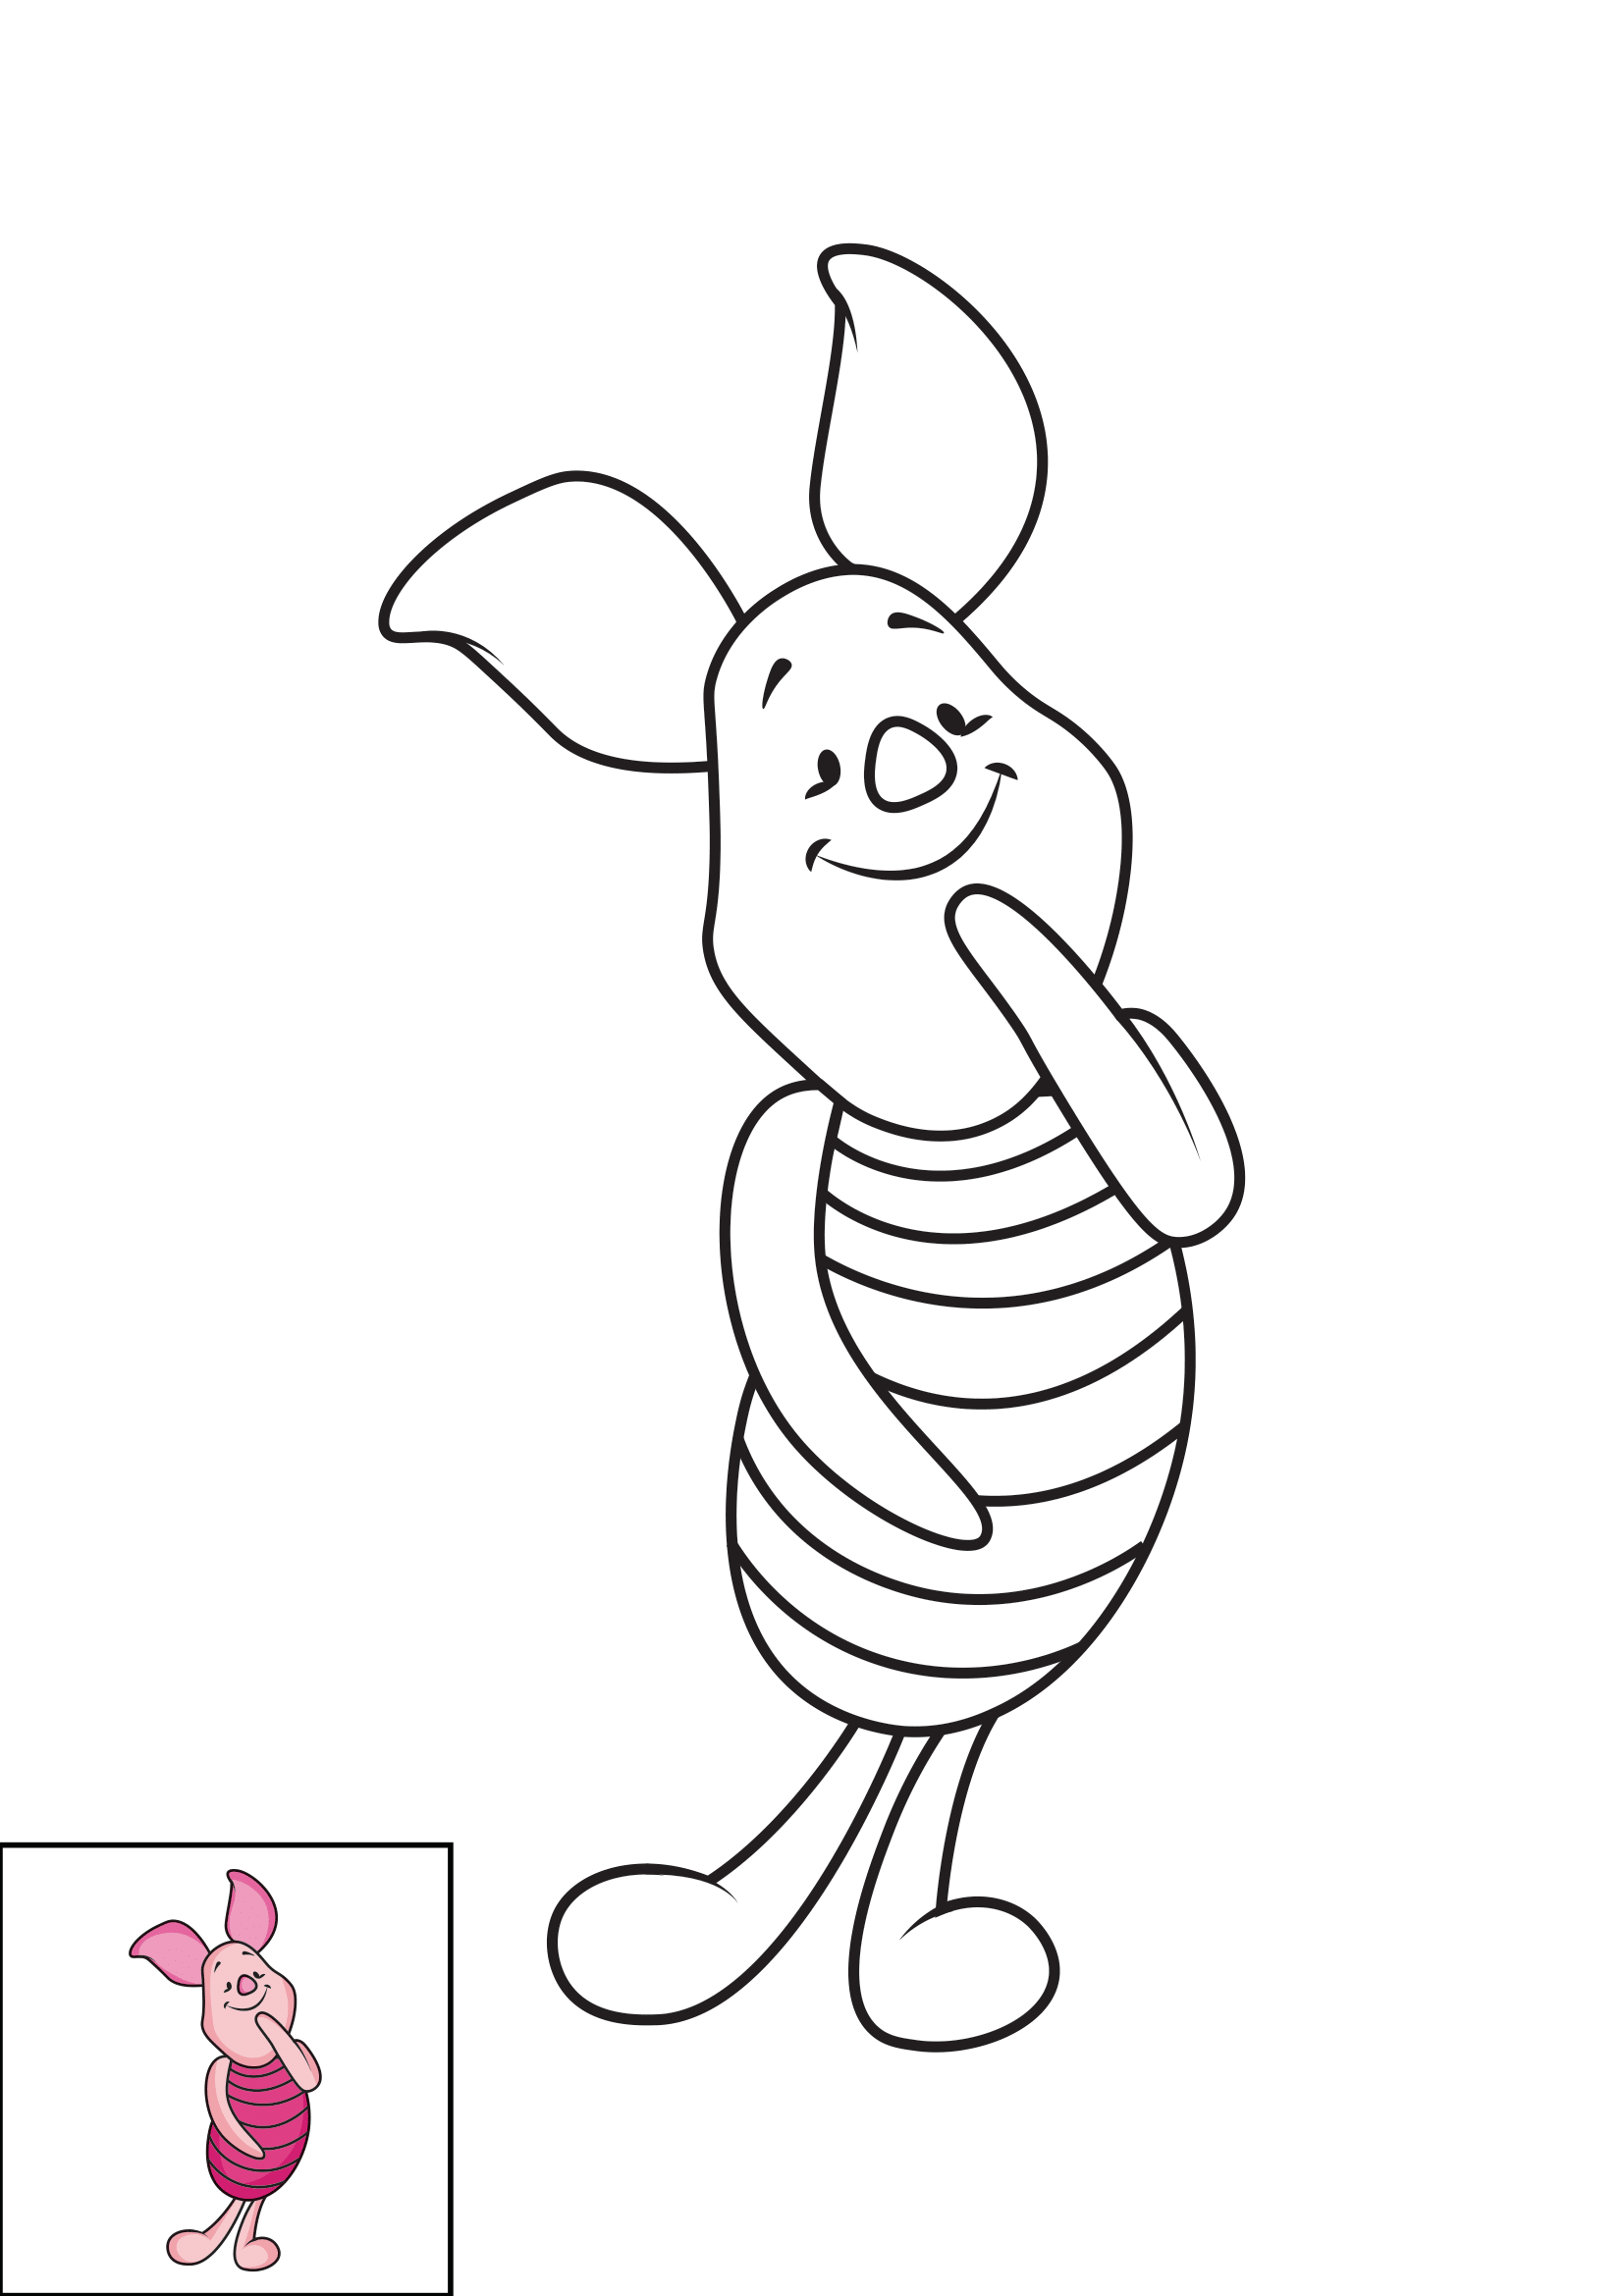 How to Draw Piglet Step by Step Printable Dotted